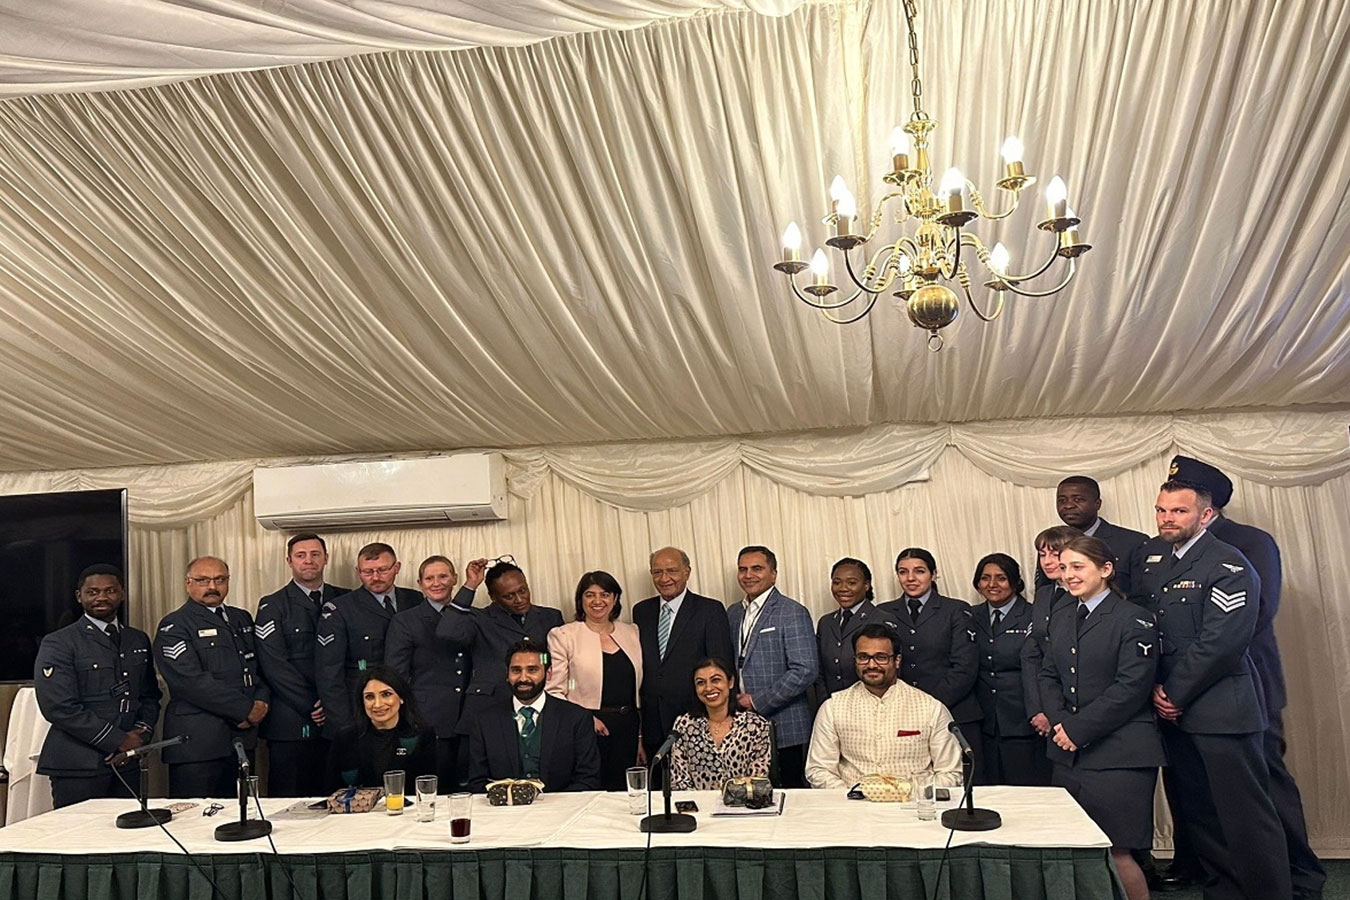 “Be The Change, Make A Difference” – Diversity And Inclusion Debate At The House Of Commons Of The Parliament Of The United Kingdom